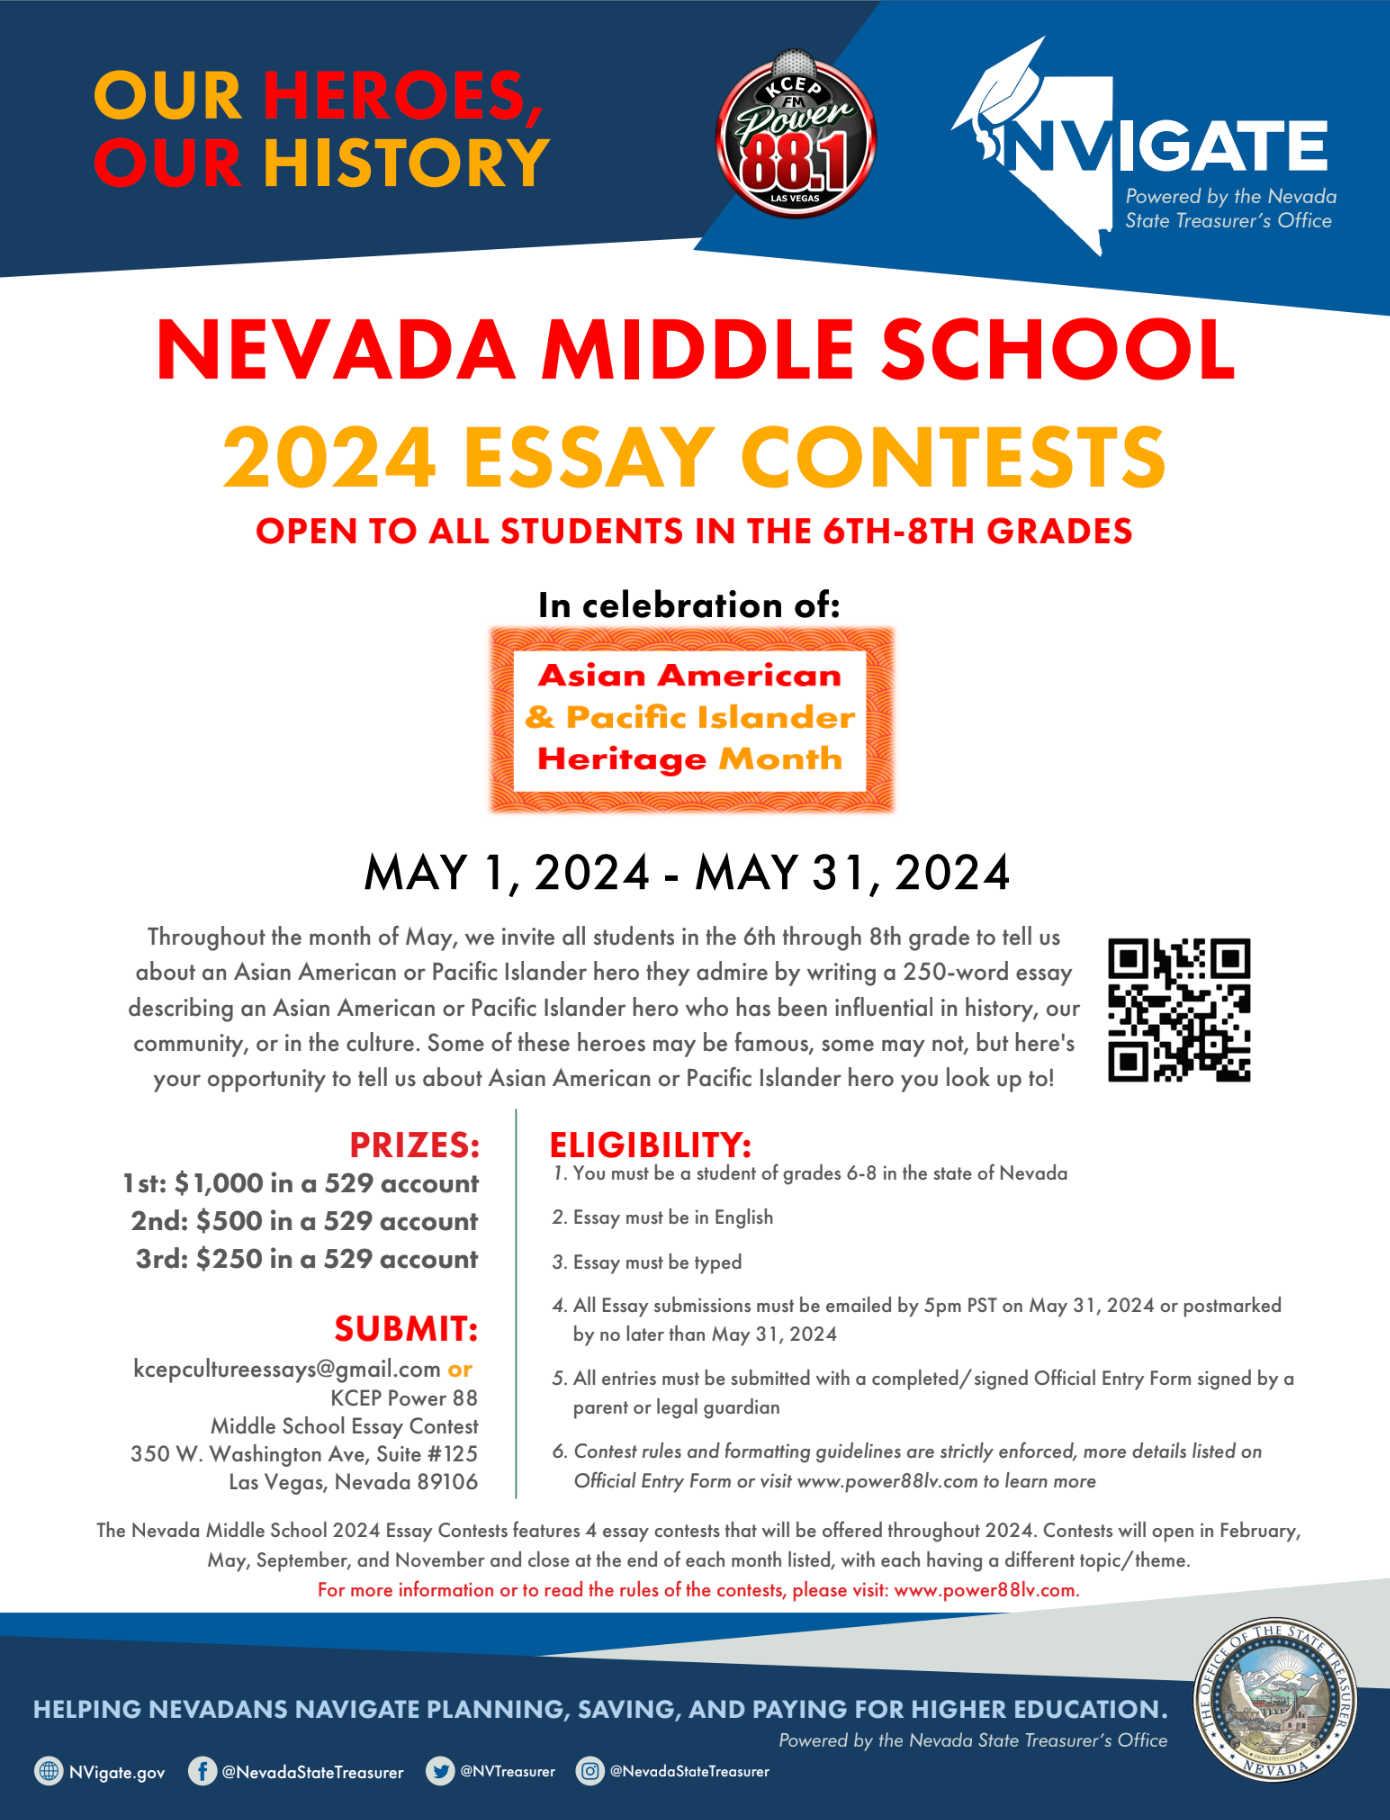 The nevada middle school 2024 essay contest is open to all students in the 6th and 5th grades.